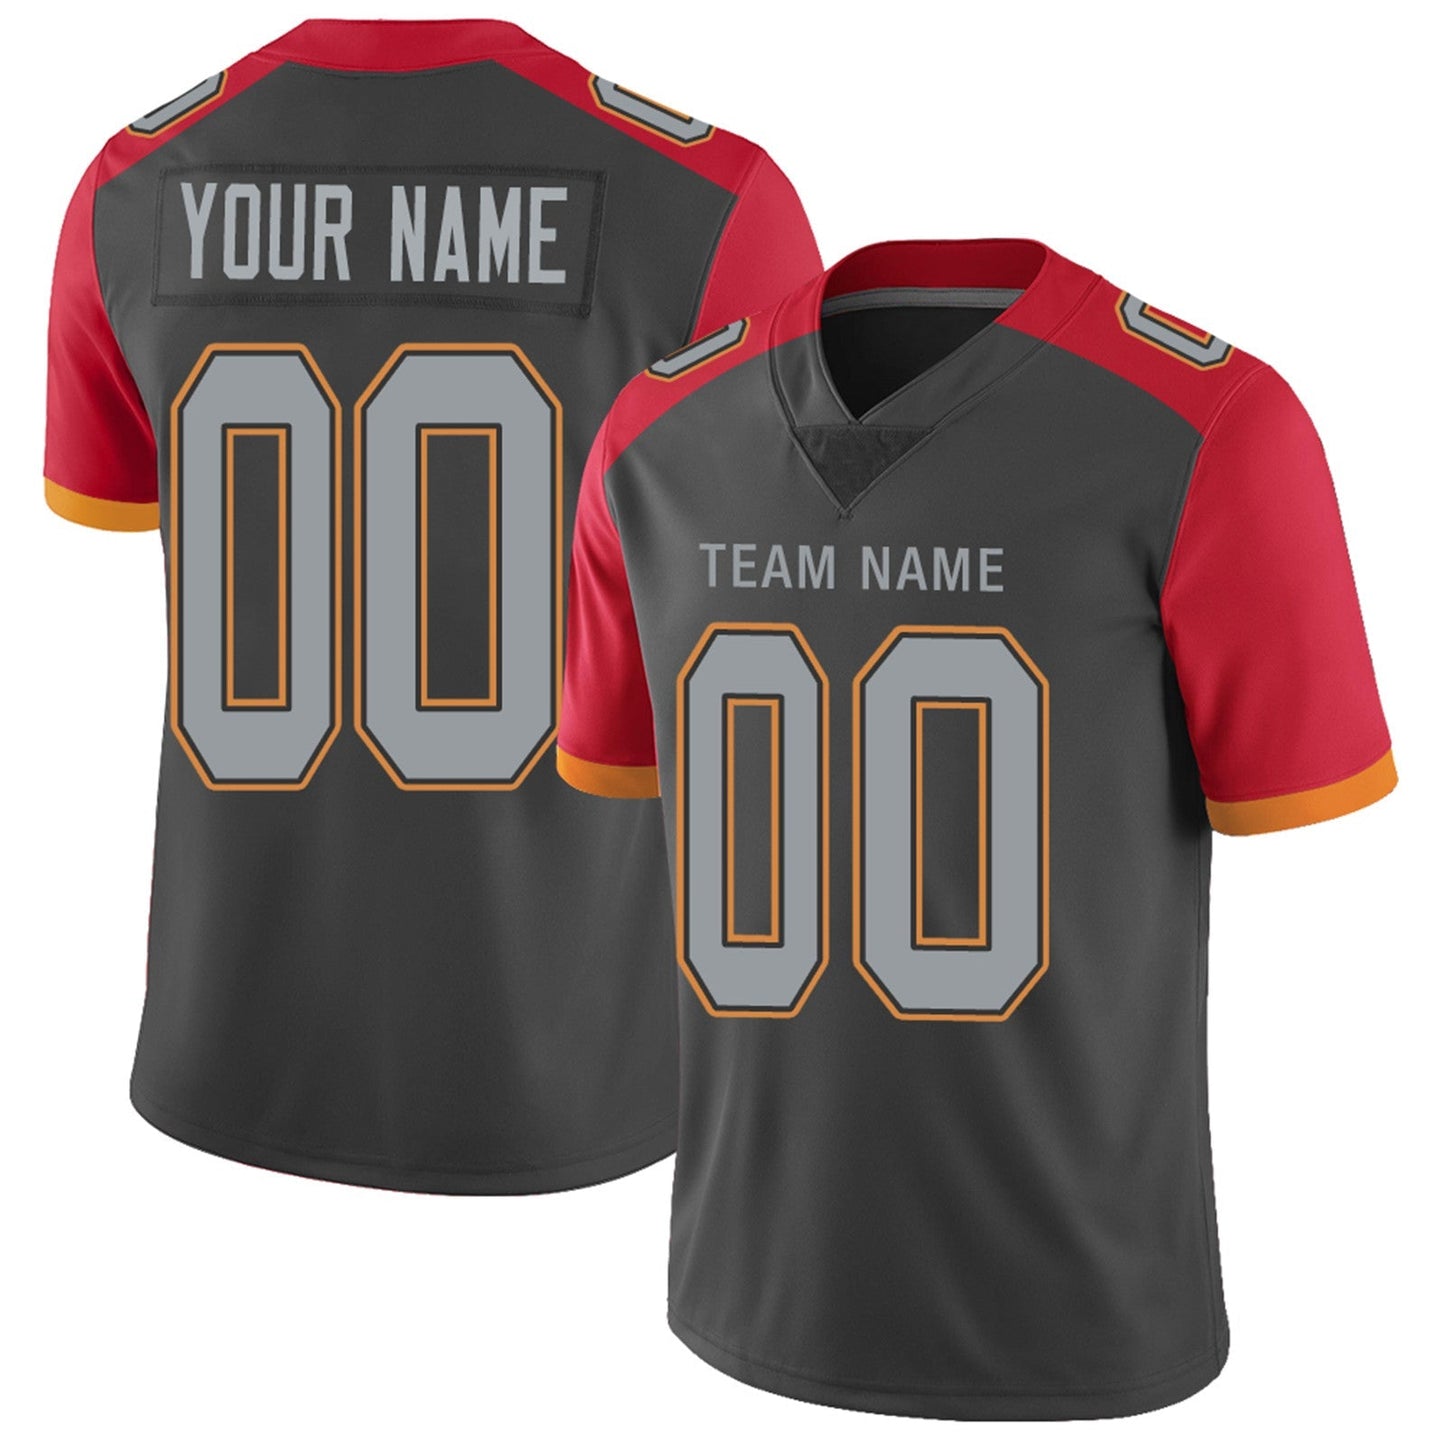 Custom TB.Buccaneers Football Jerseys Team Player or Personalized Design Your Own Name for Men's Women's Youth Jerseys Red